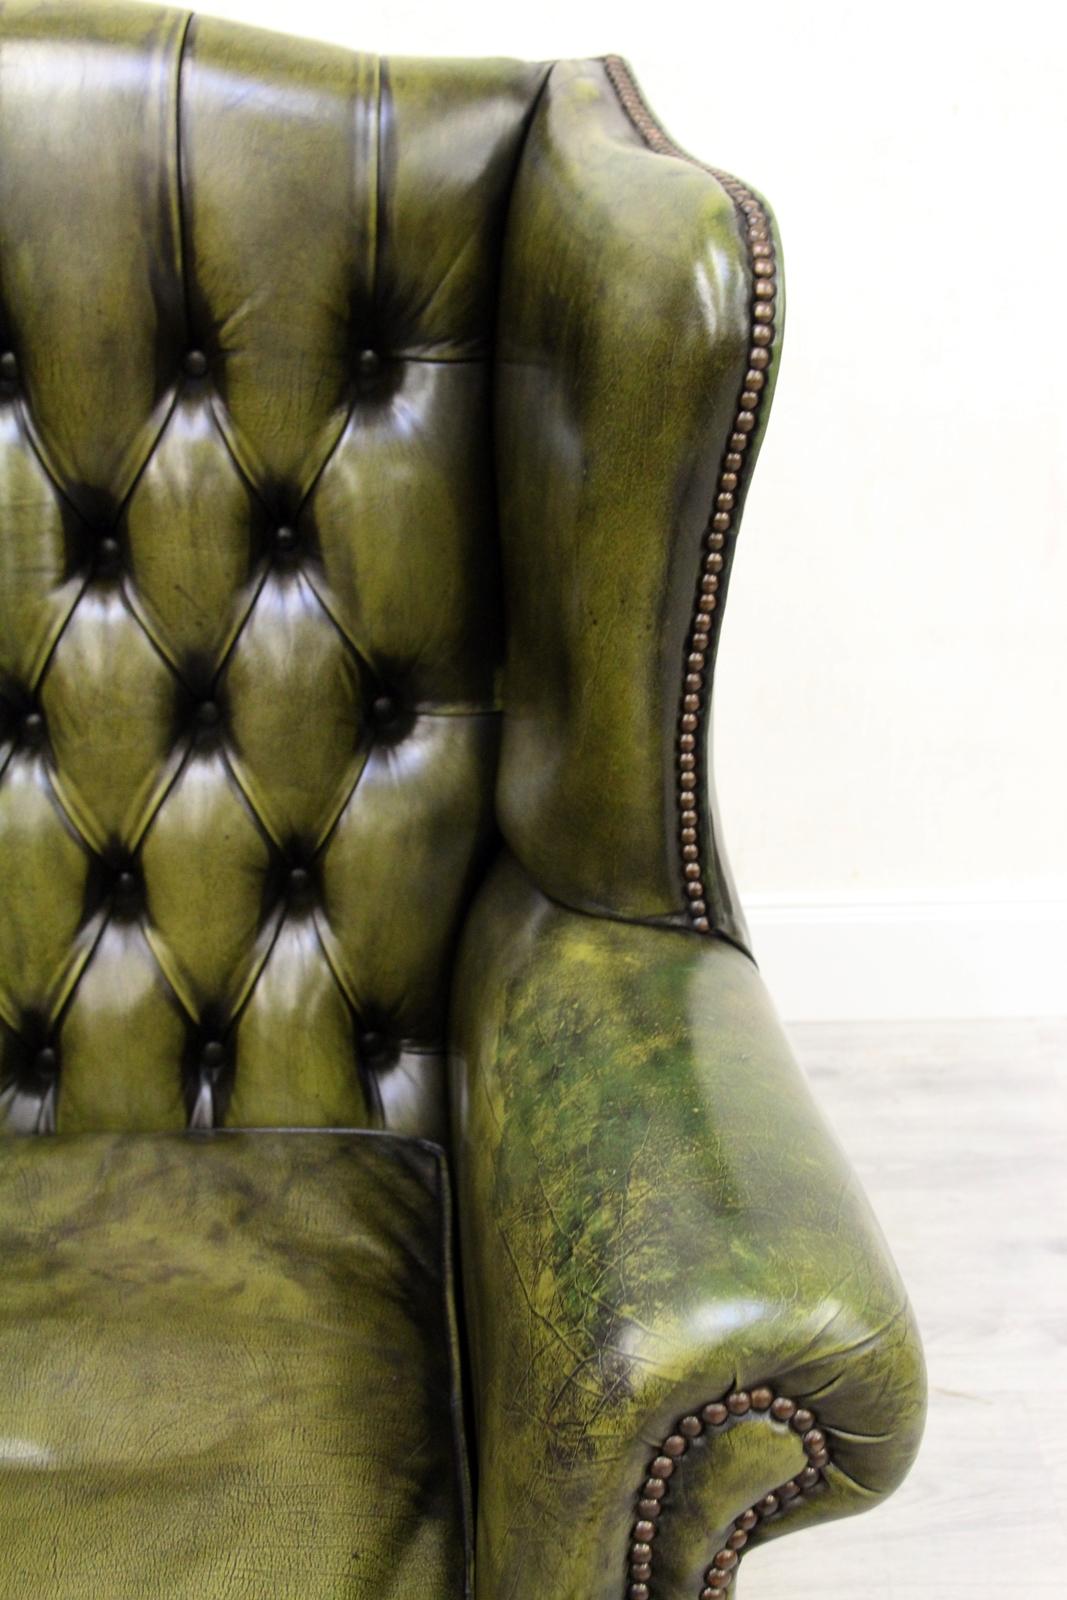 Chesterfield armchair
in original design

Condition: The chair is in good condition, with normal signs of wear
armchair
Measures: Height x 100cm width x 90cm depth x 85cm
Upholstery is in good condition (see photos).
Cushion: foam
Color